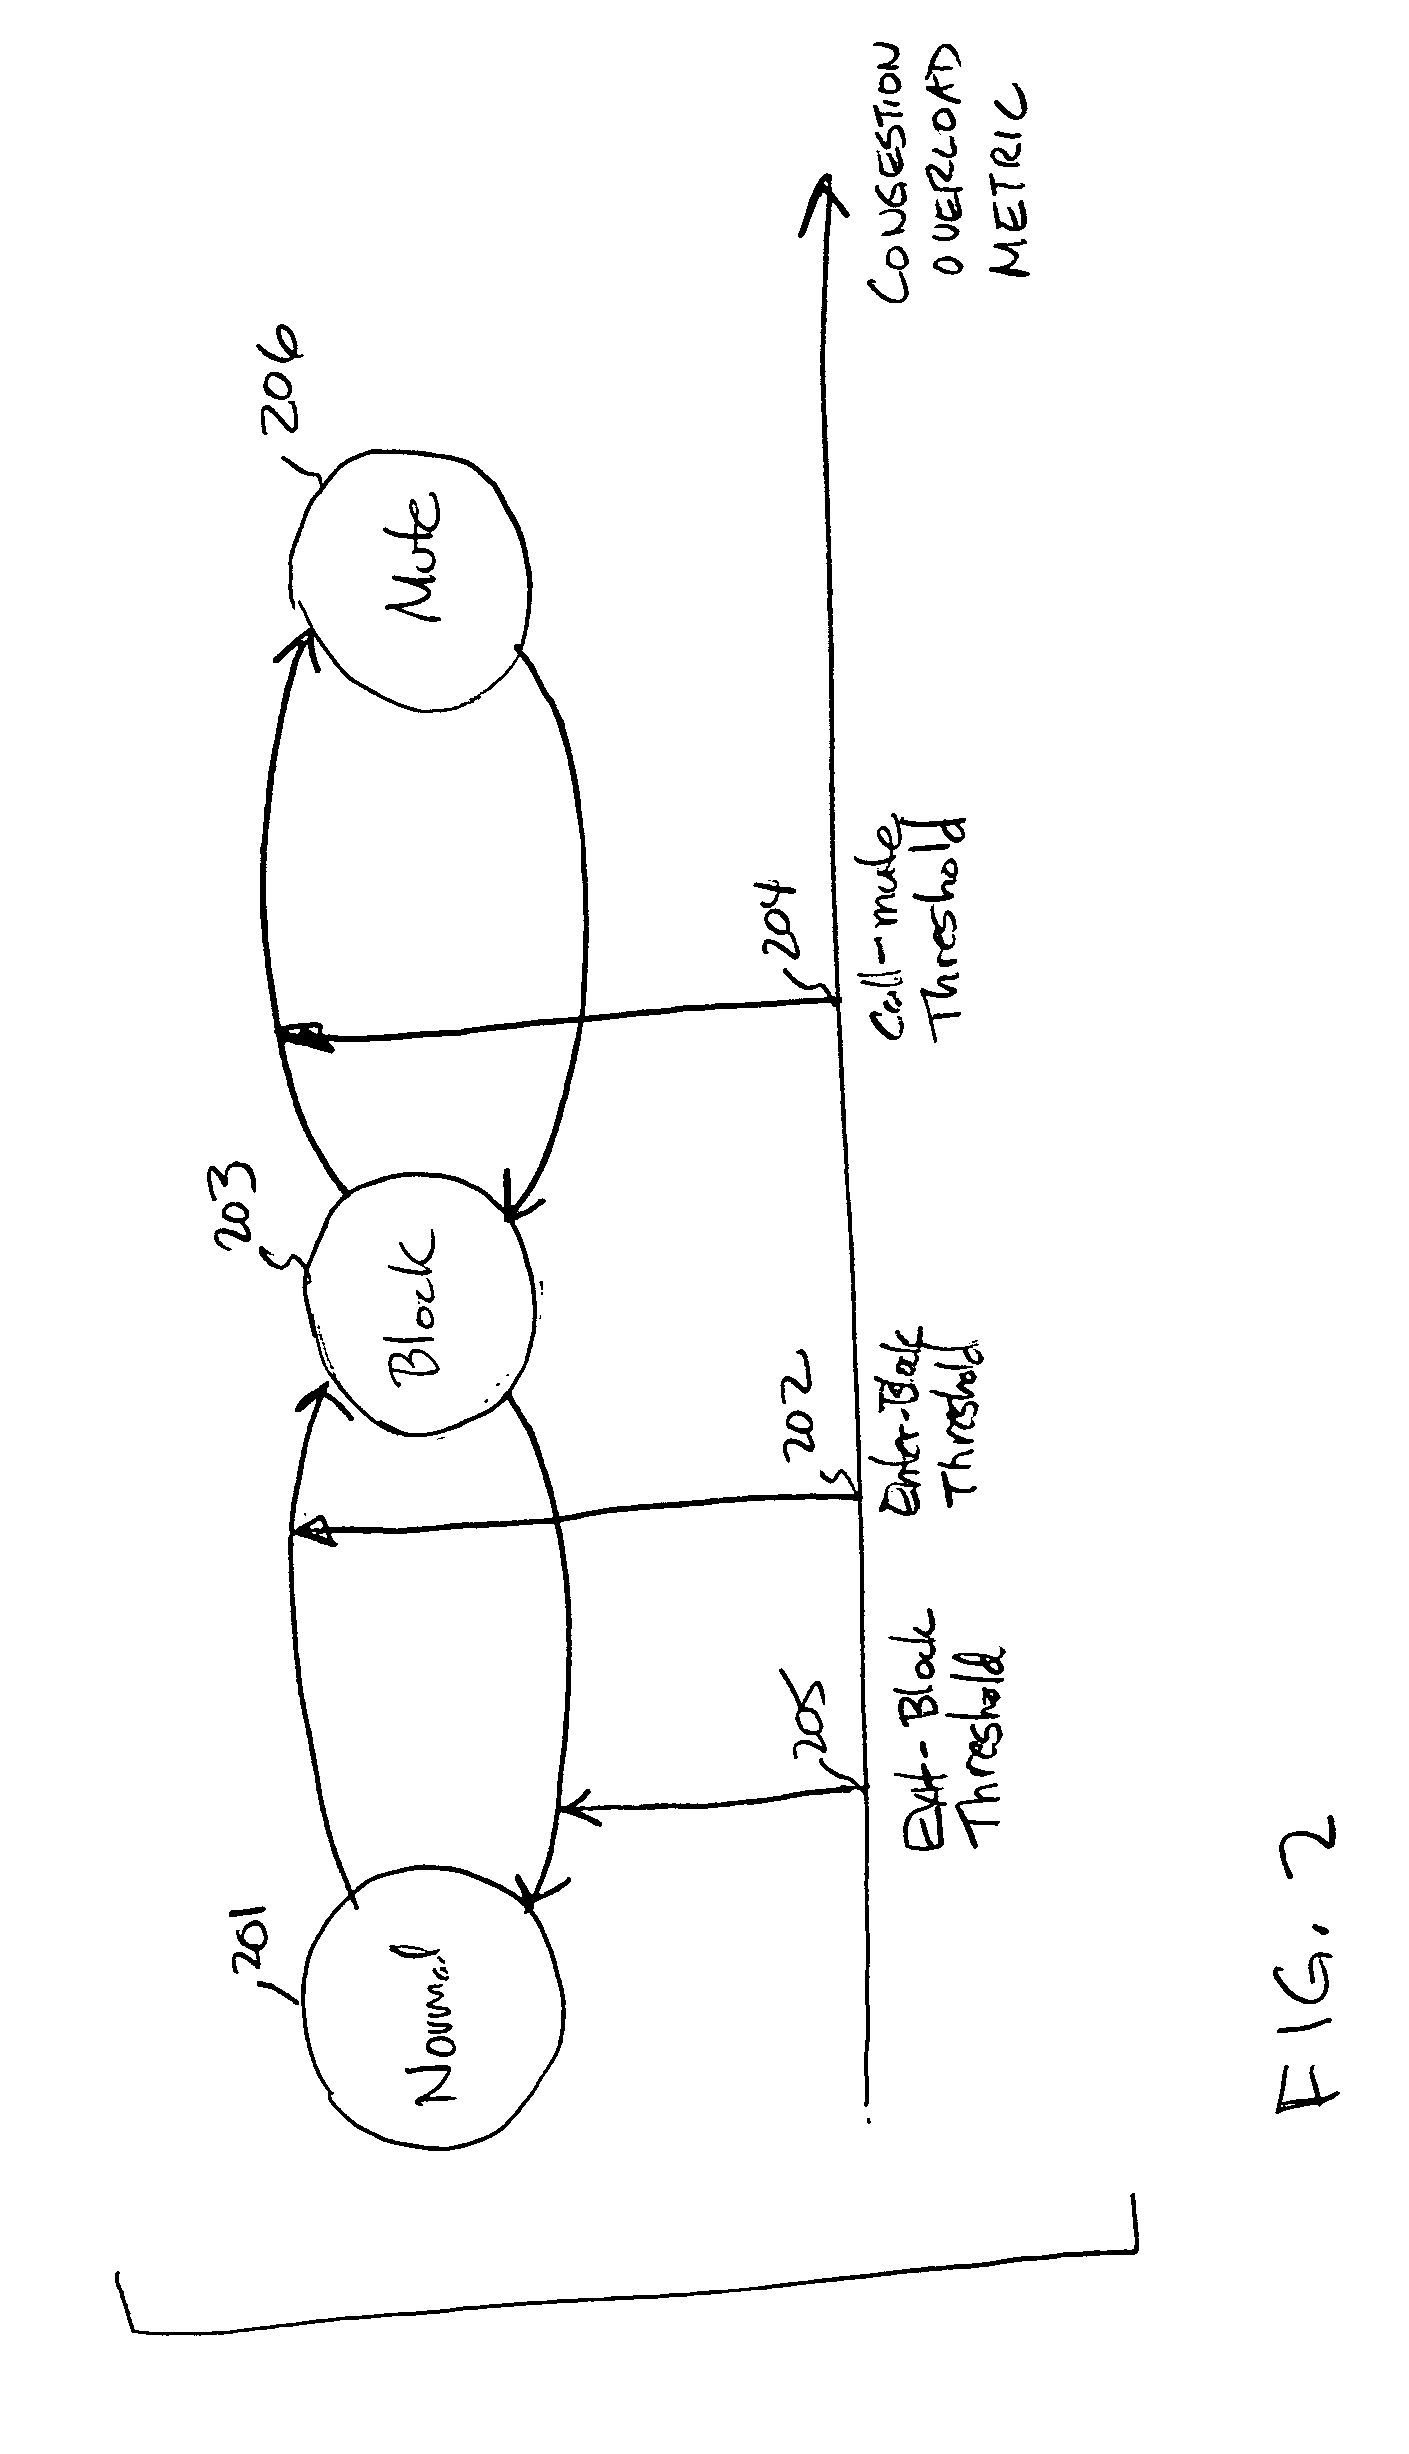 Method for reverse link congestion overload control in wireless high speed data applications